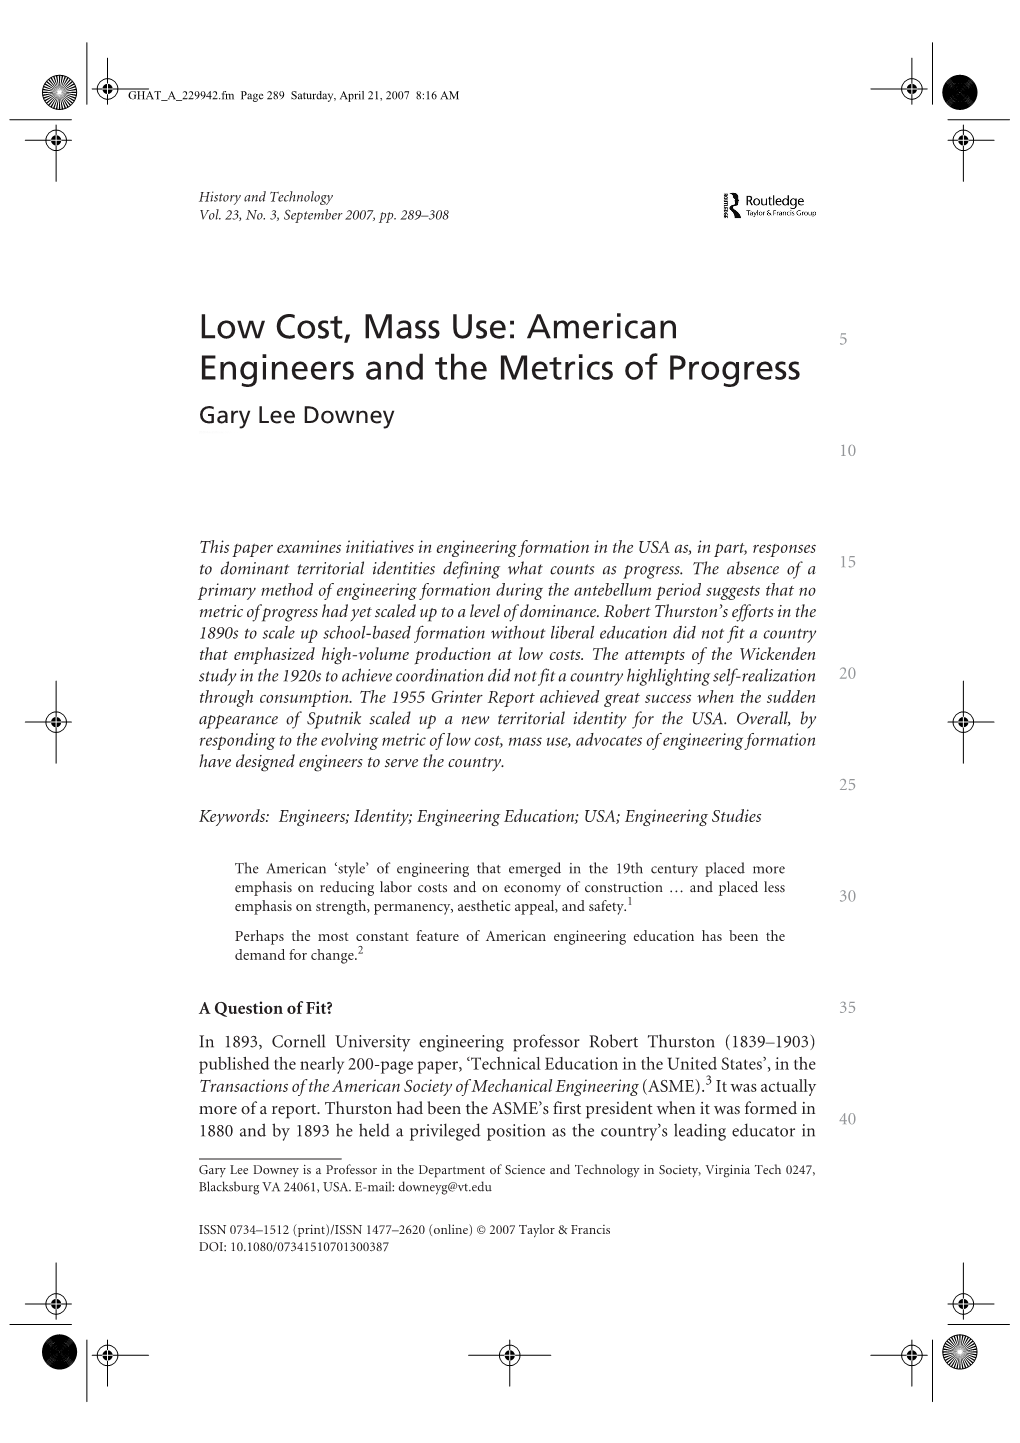 Low Cost, Mass Use: American Engineers and the Metrics of Progress